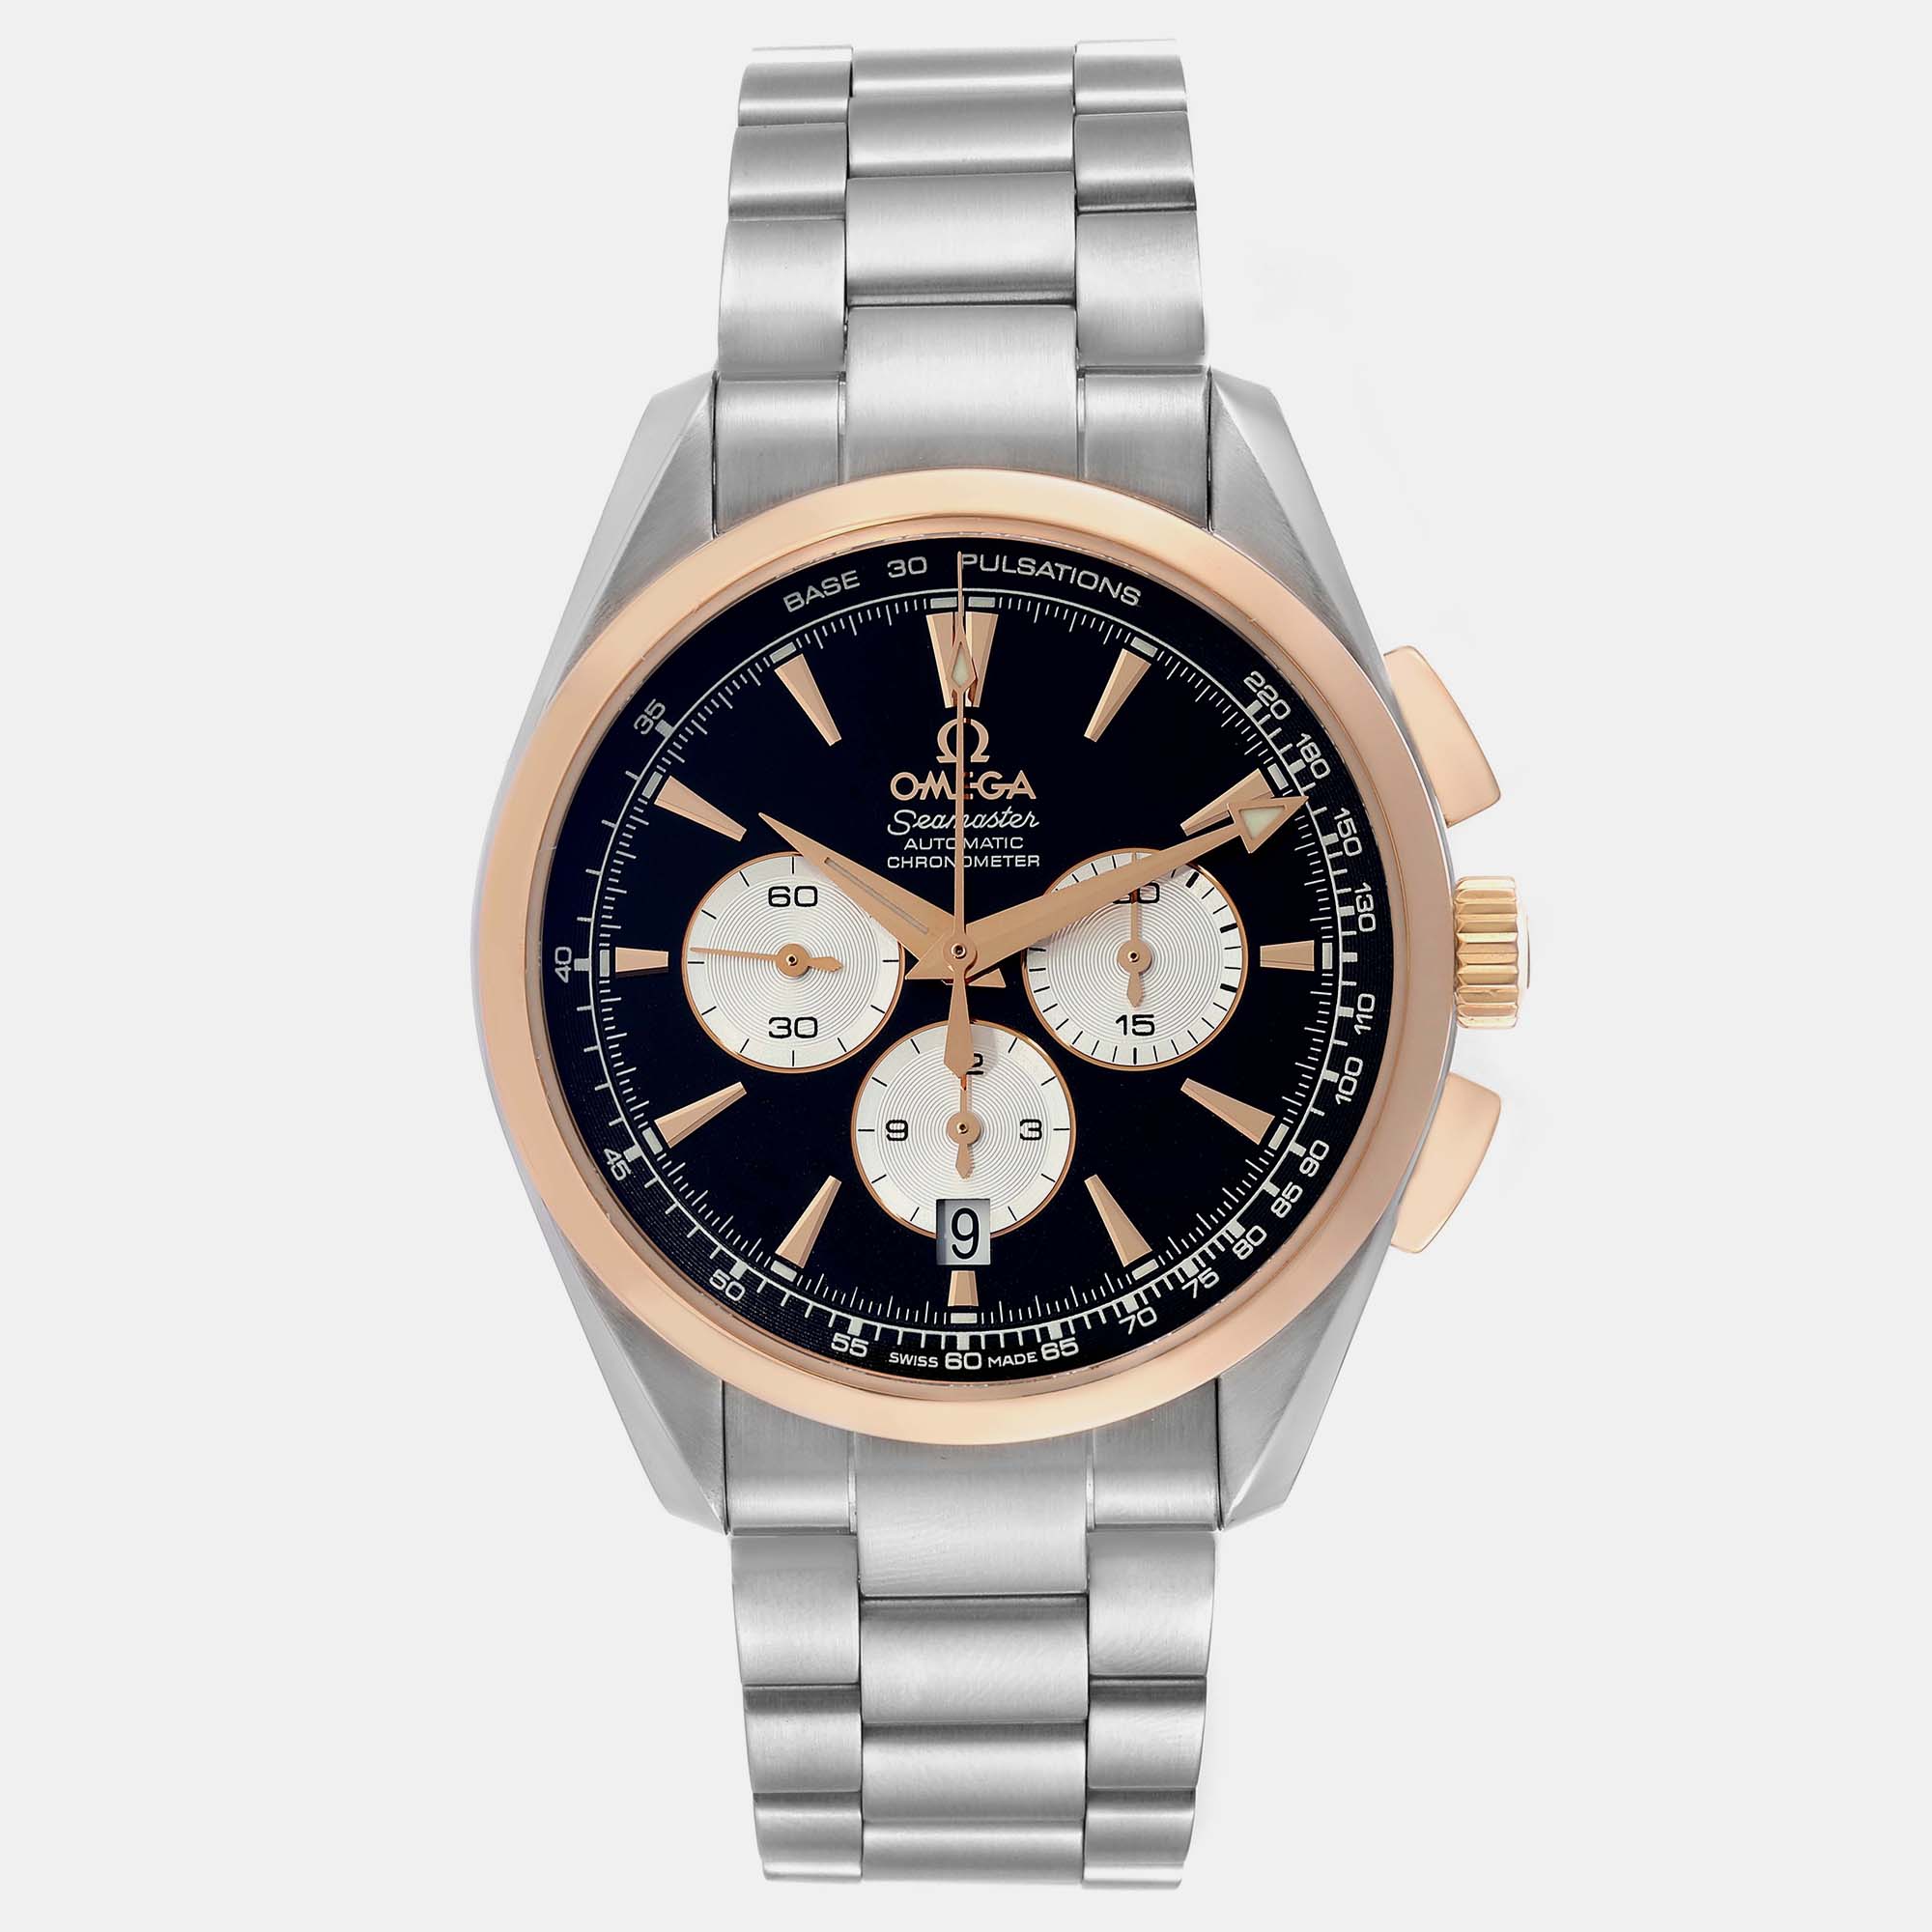 The charm of a finely crafted wristwatch accompanies the wearer through the years and to any occasion they have a date for. It is this charm infused with timeless luxury that makes this Omega wristwatch such an incredible pick.